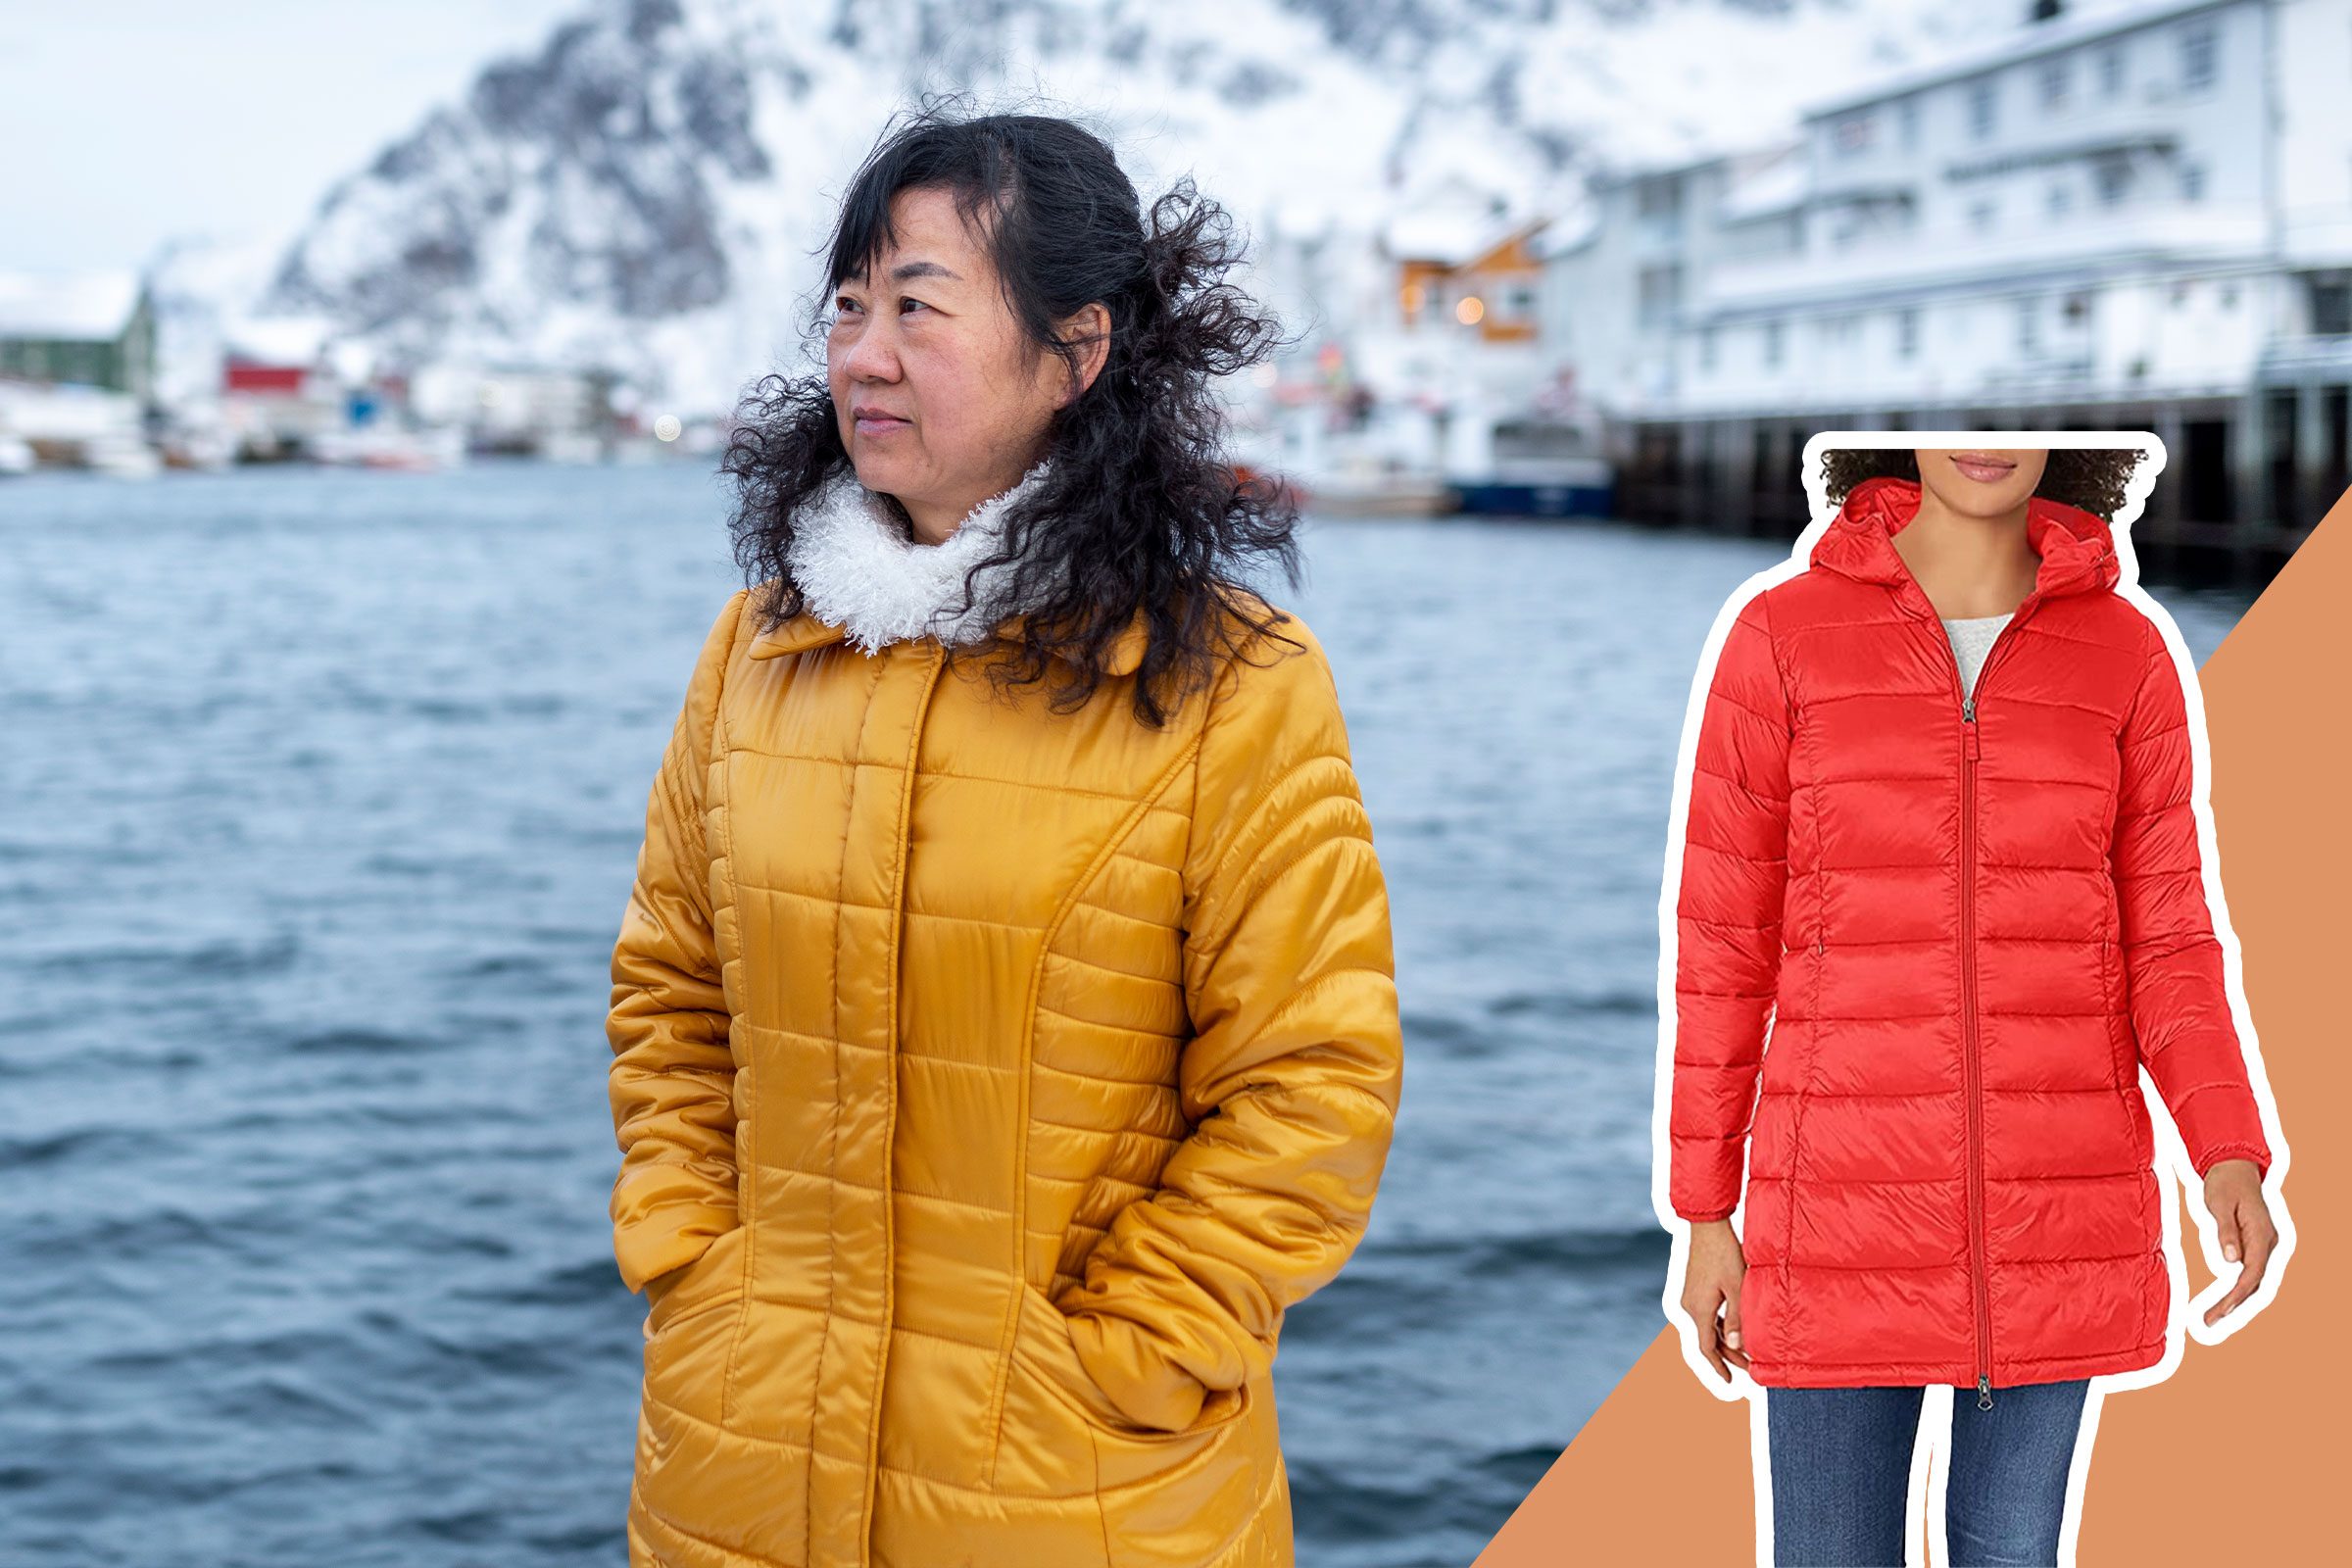 woman in a yellow puffy coat traveling standing outside in the winter near a body of water